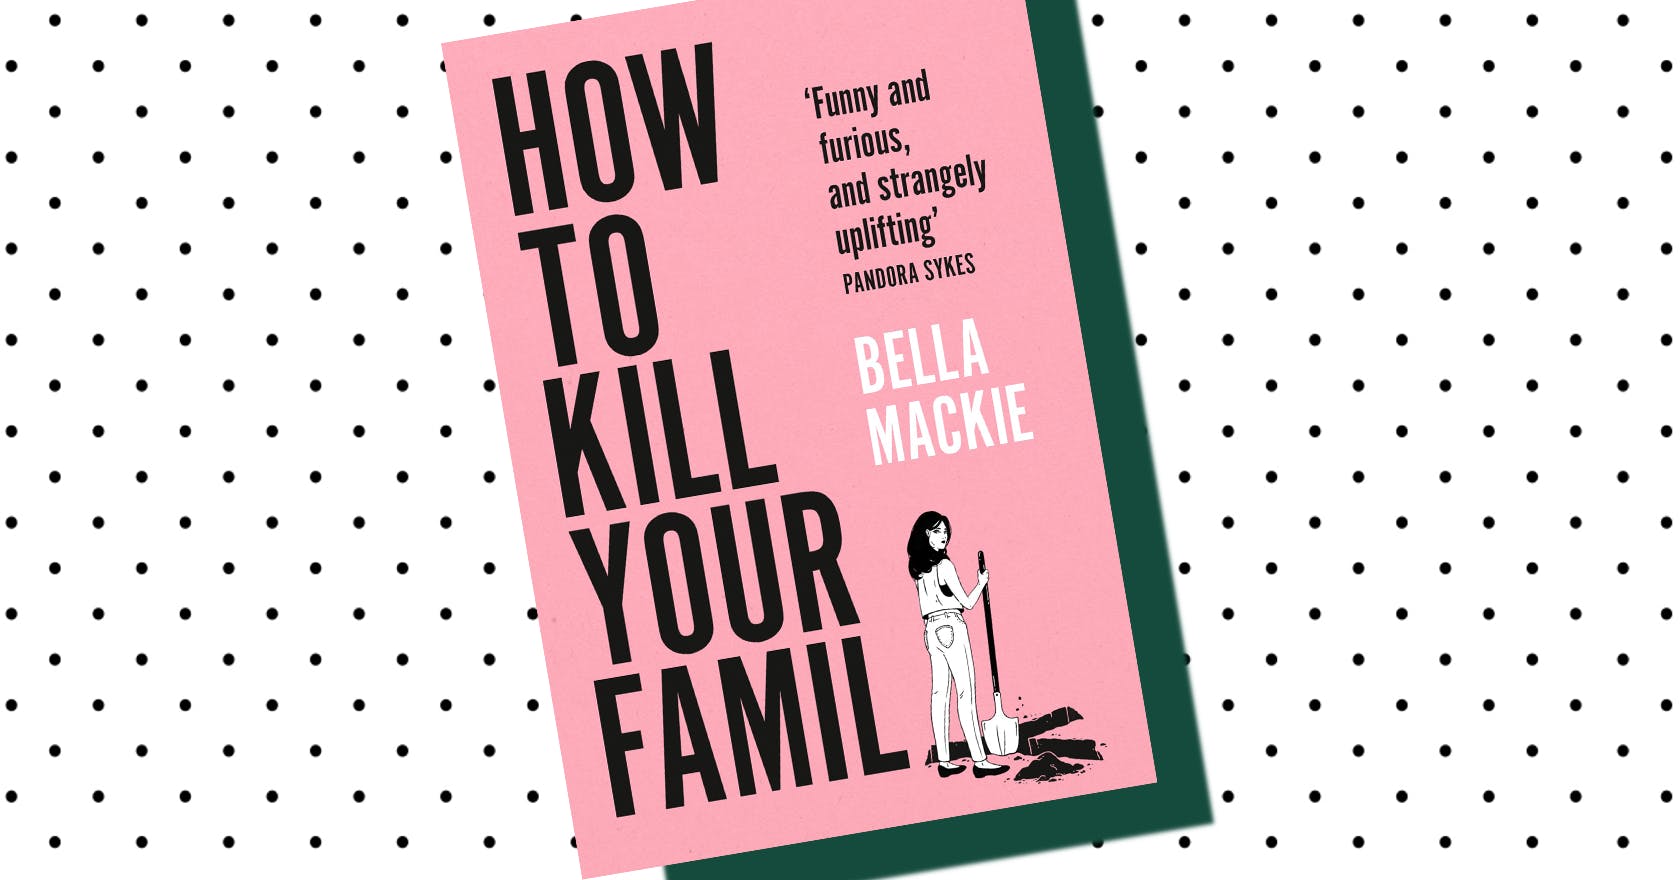 How To Kill Your Family by Bella Mackie read an extract